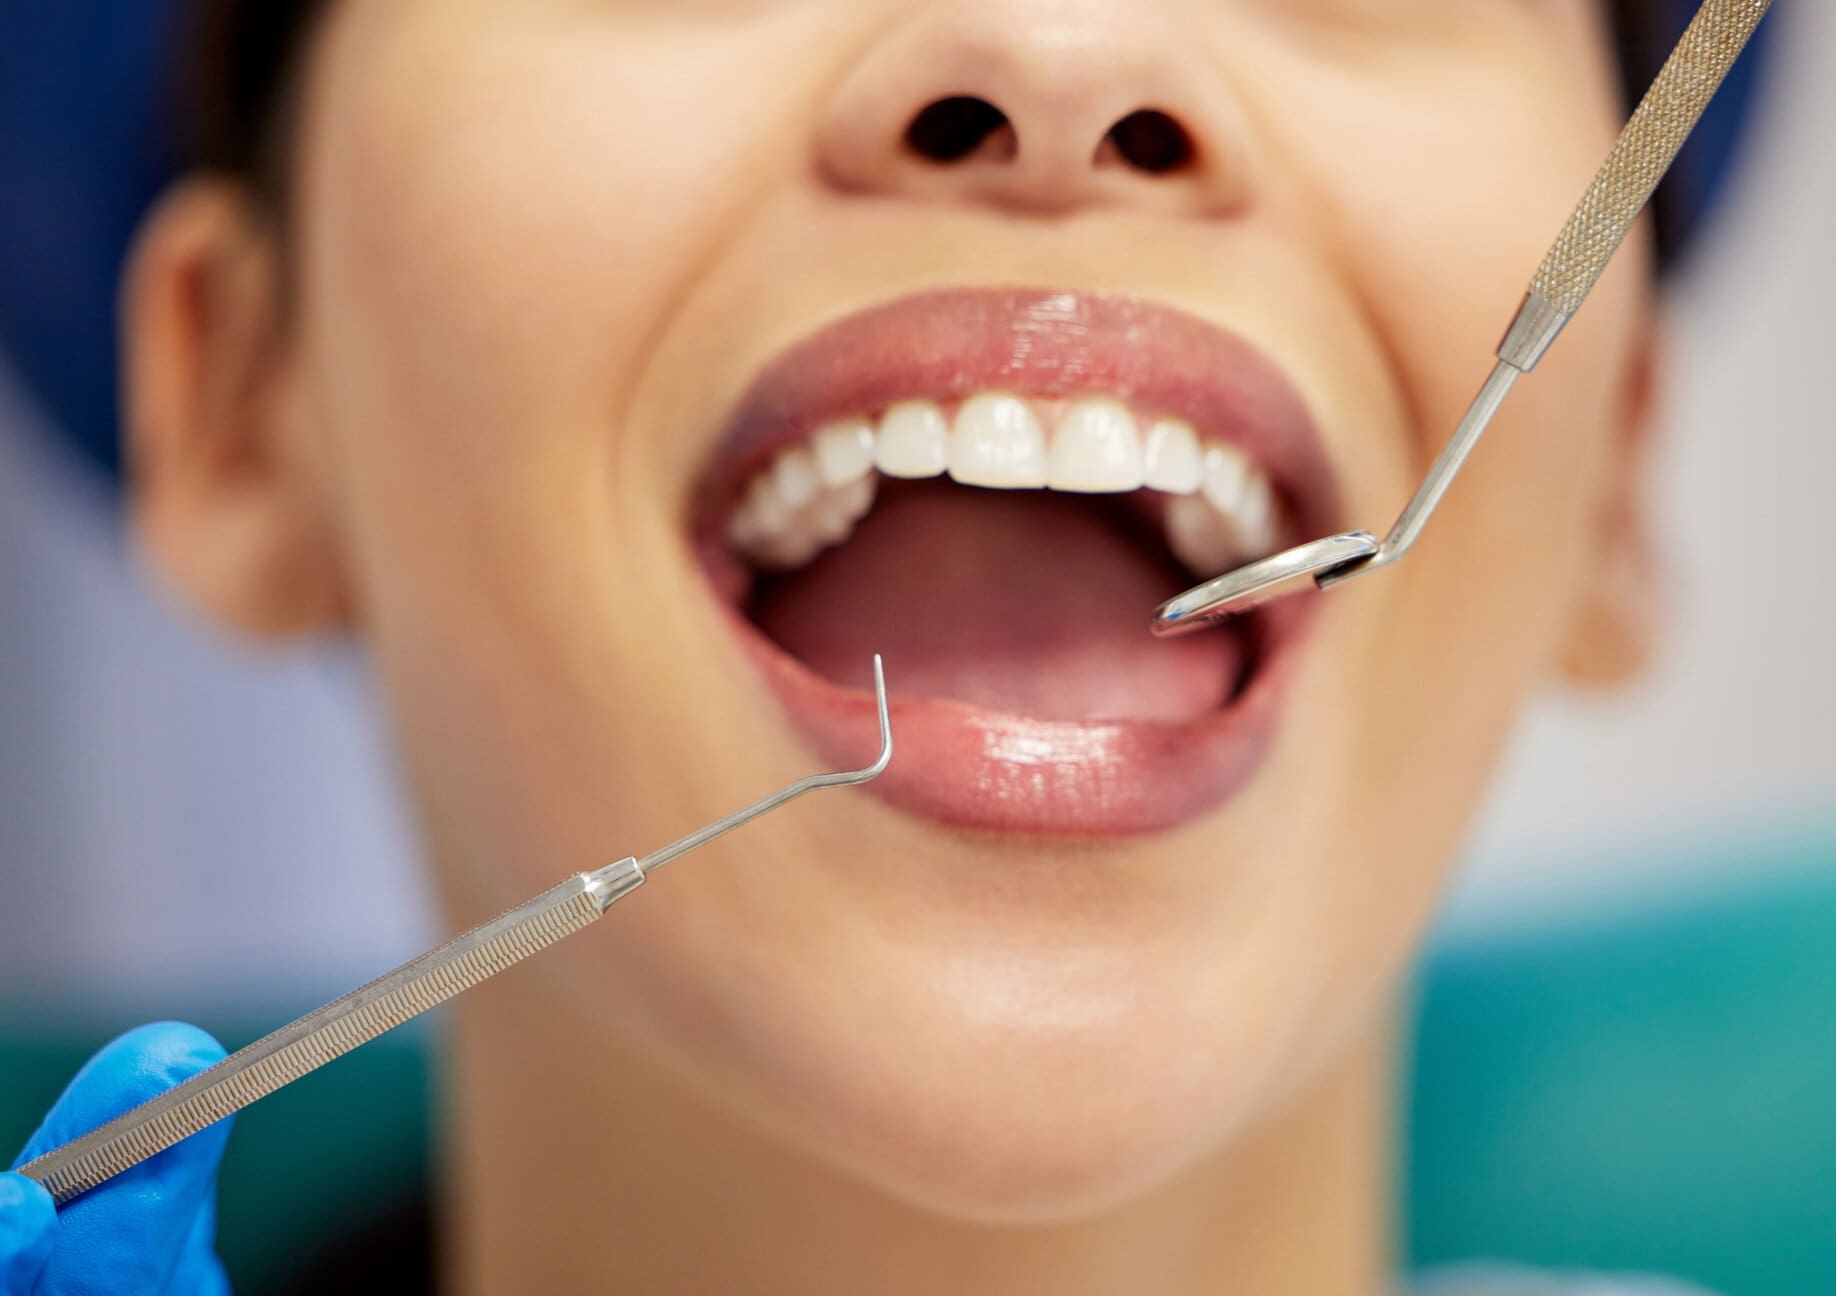 Patient undergoing dental treatment with several dental instruments surrounding her mouth.